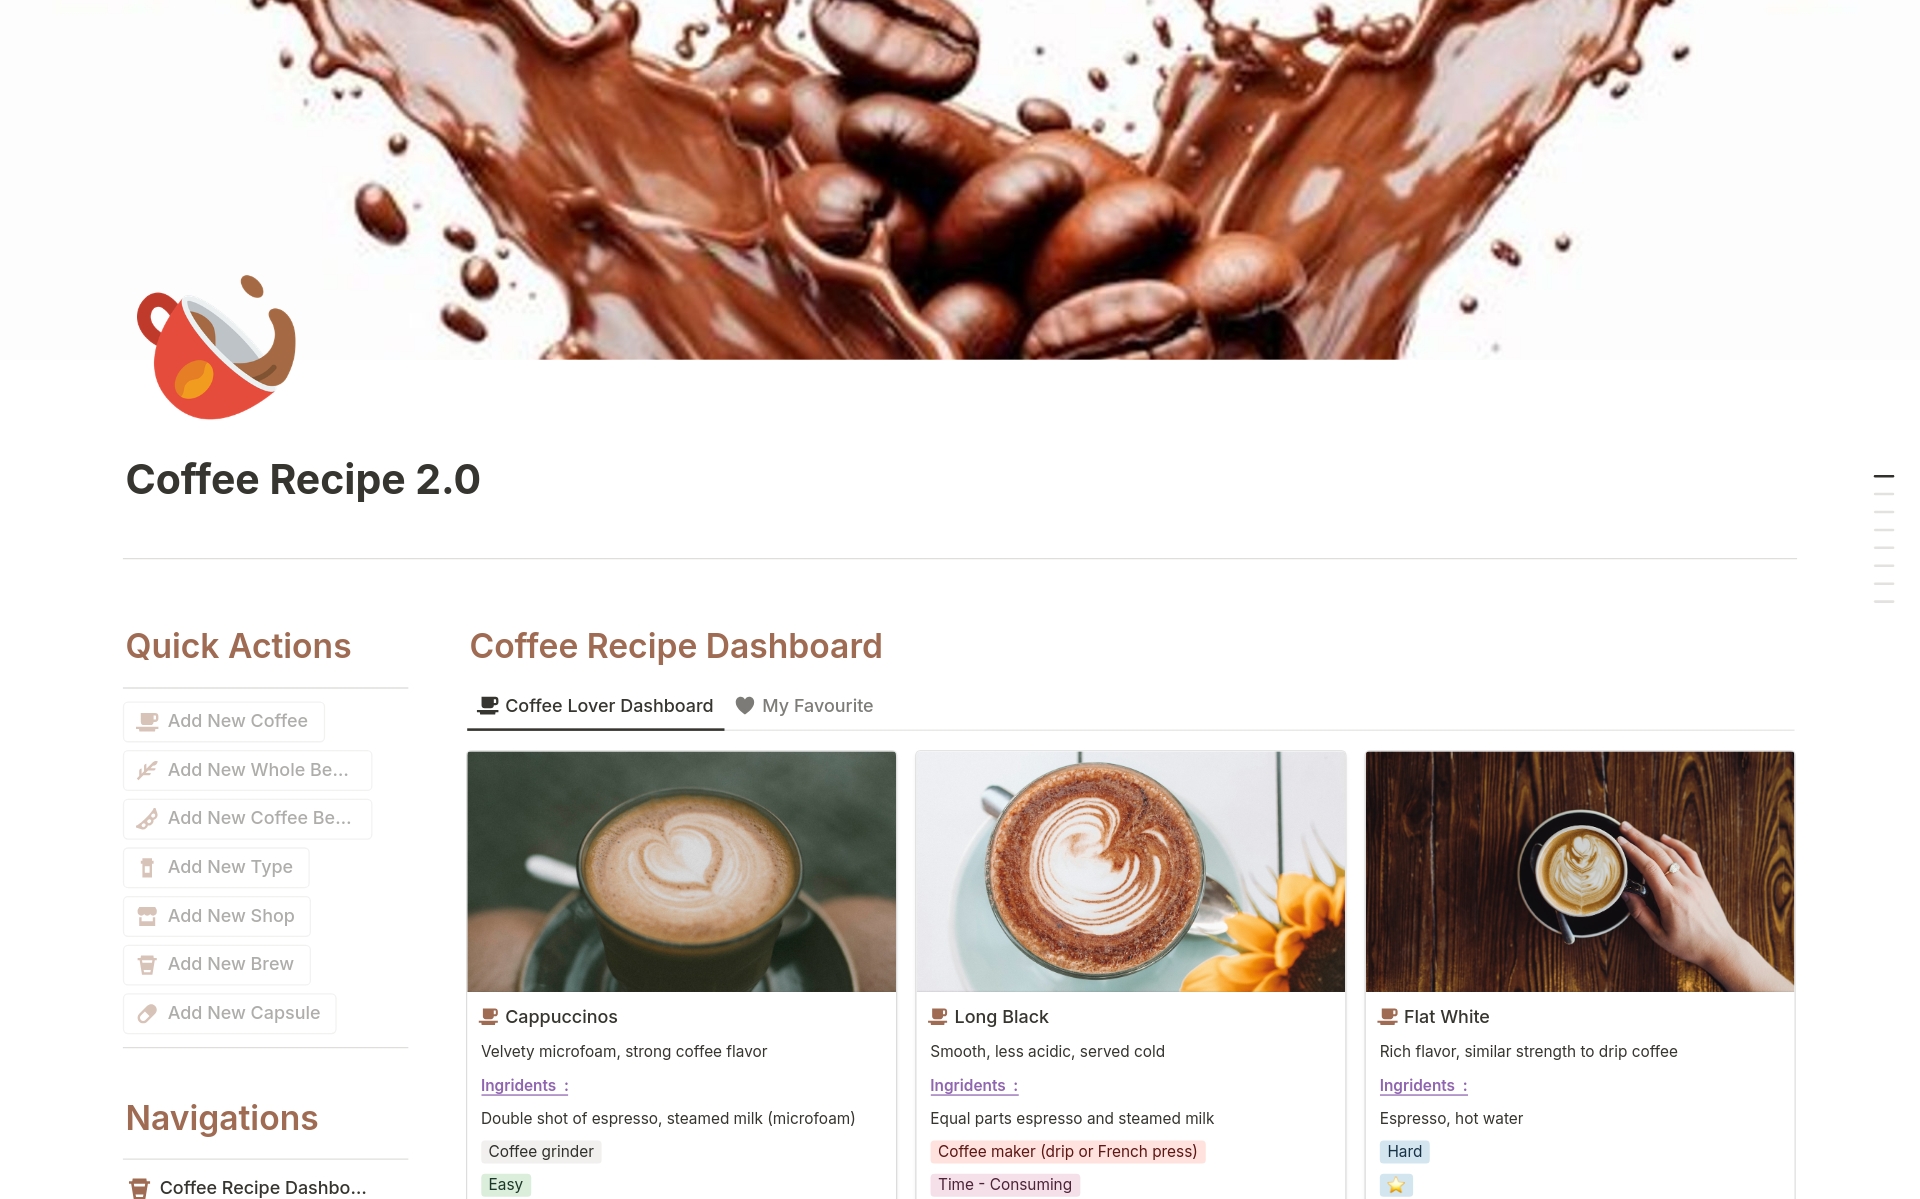 Coffee Dashboard, is the ultimate hub for all things coffee.

Notion dashboard is designed to help you explore and enjoy the world of coffee like never before.

From tracking your favorite blends and roast levels to discovering new brewing methods and recipes, this dashboard has 